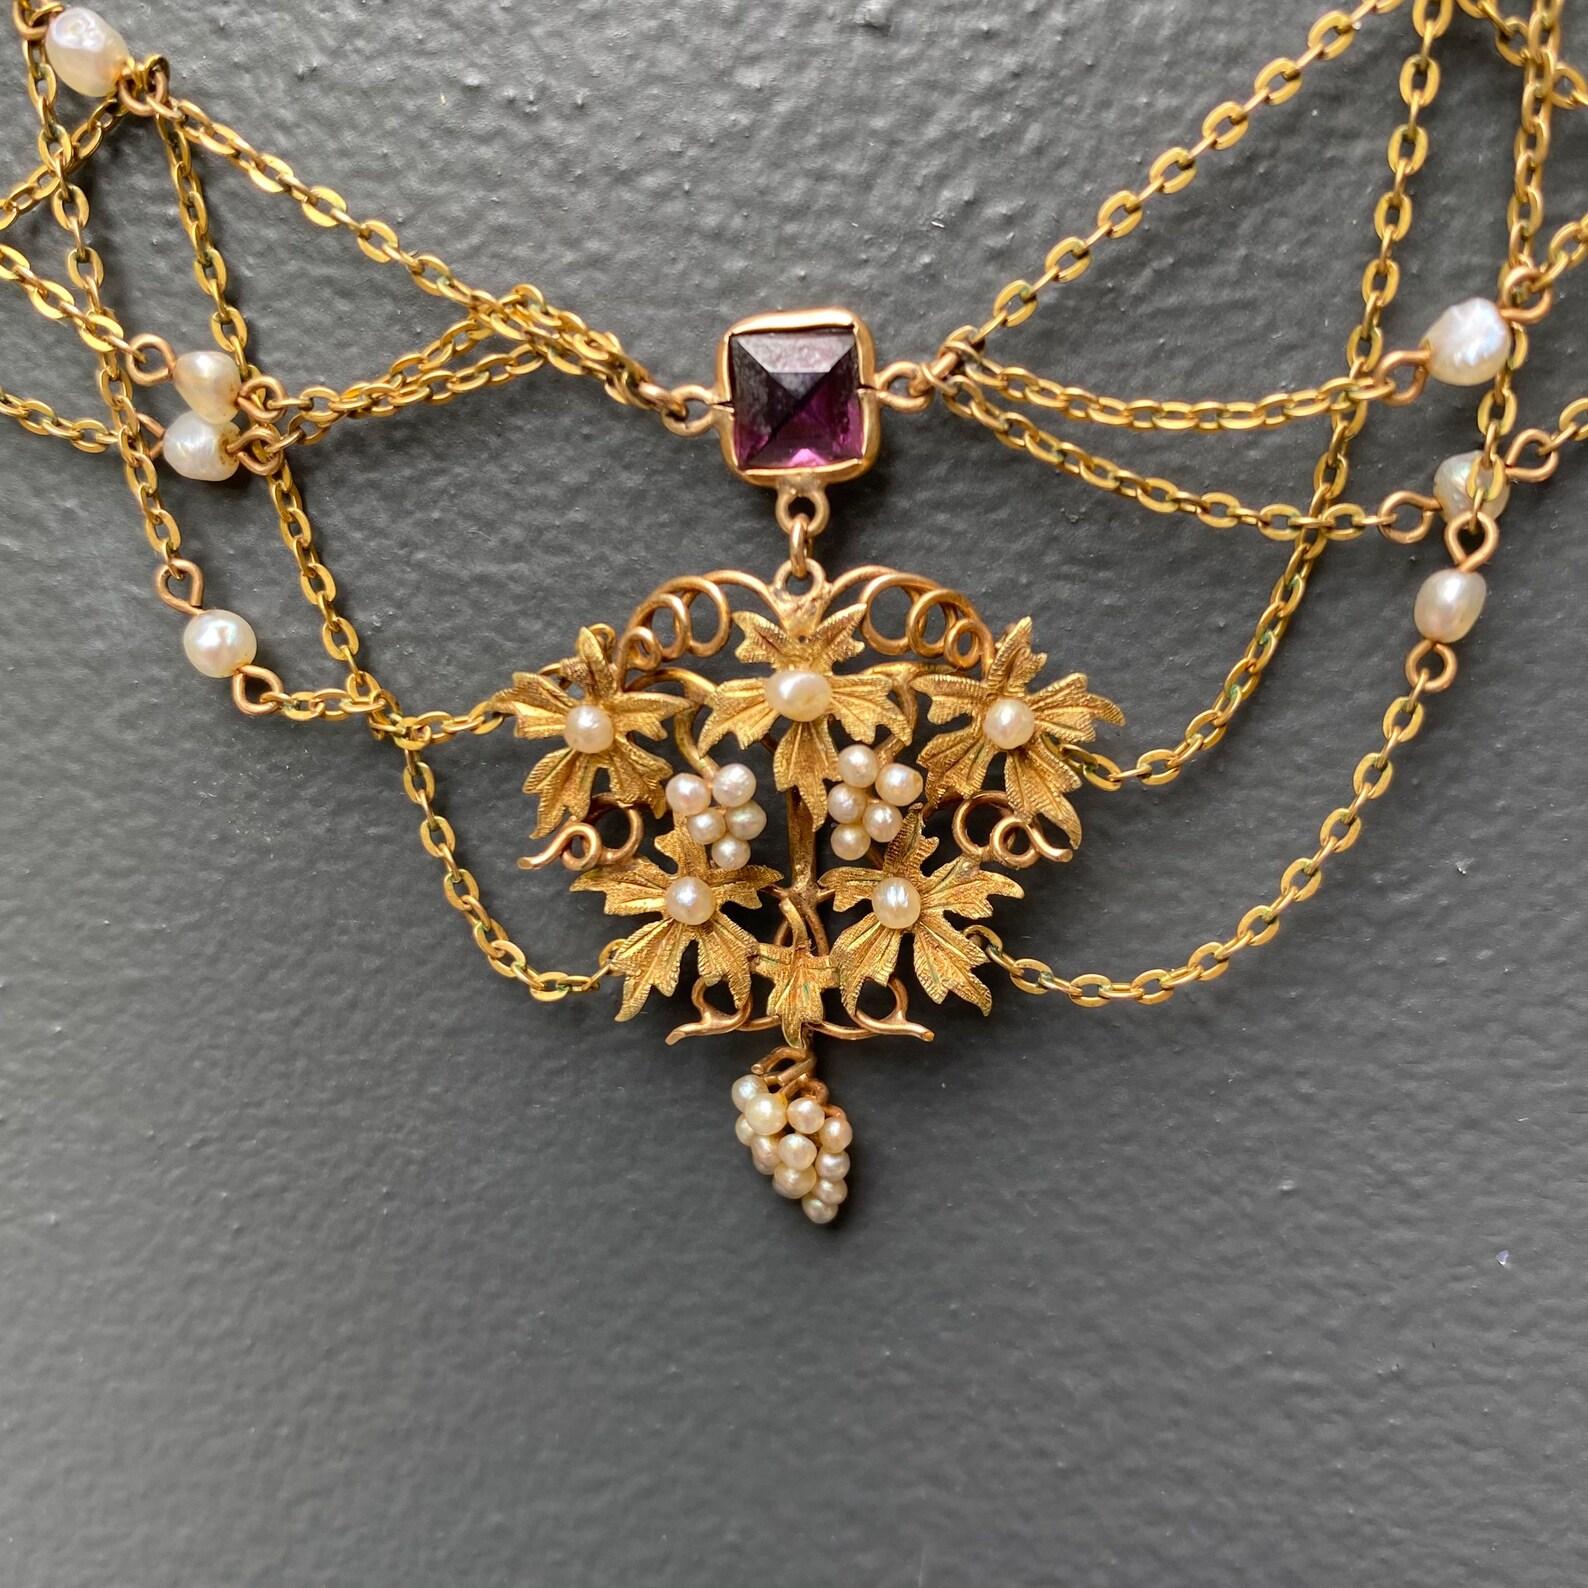 Art Nouveau Amethyst Seed Pearls Festoon Necklace Gold In Good Condition For Sale In Plainsboro, NJ